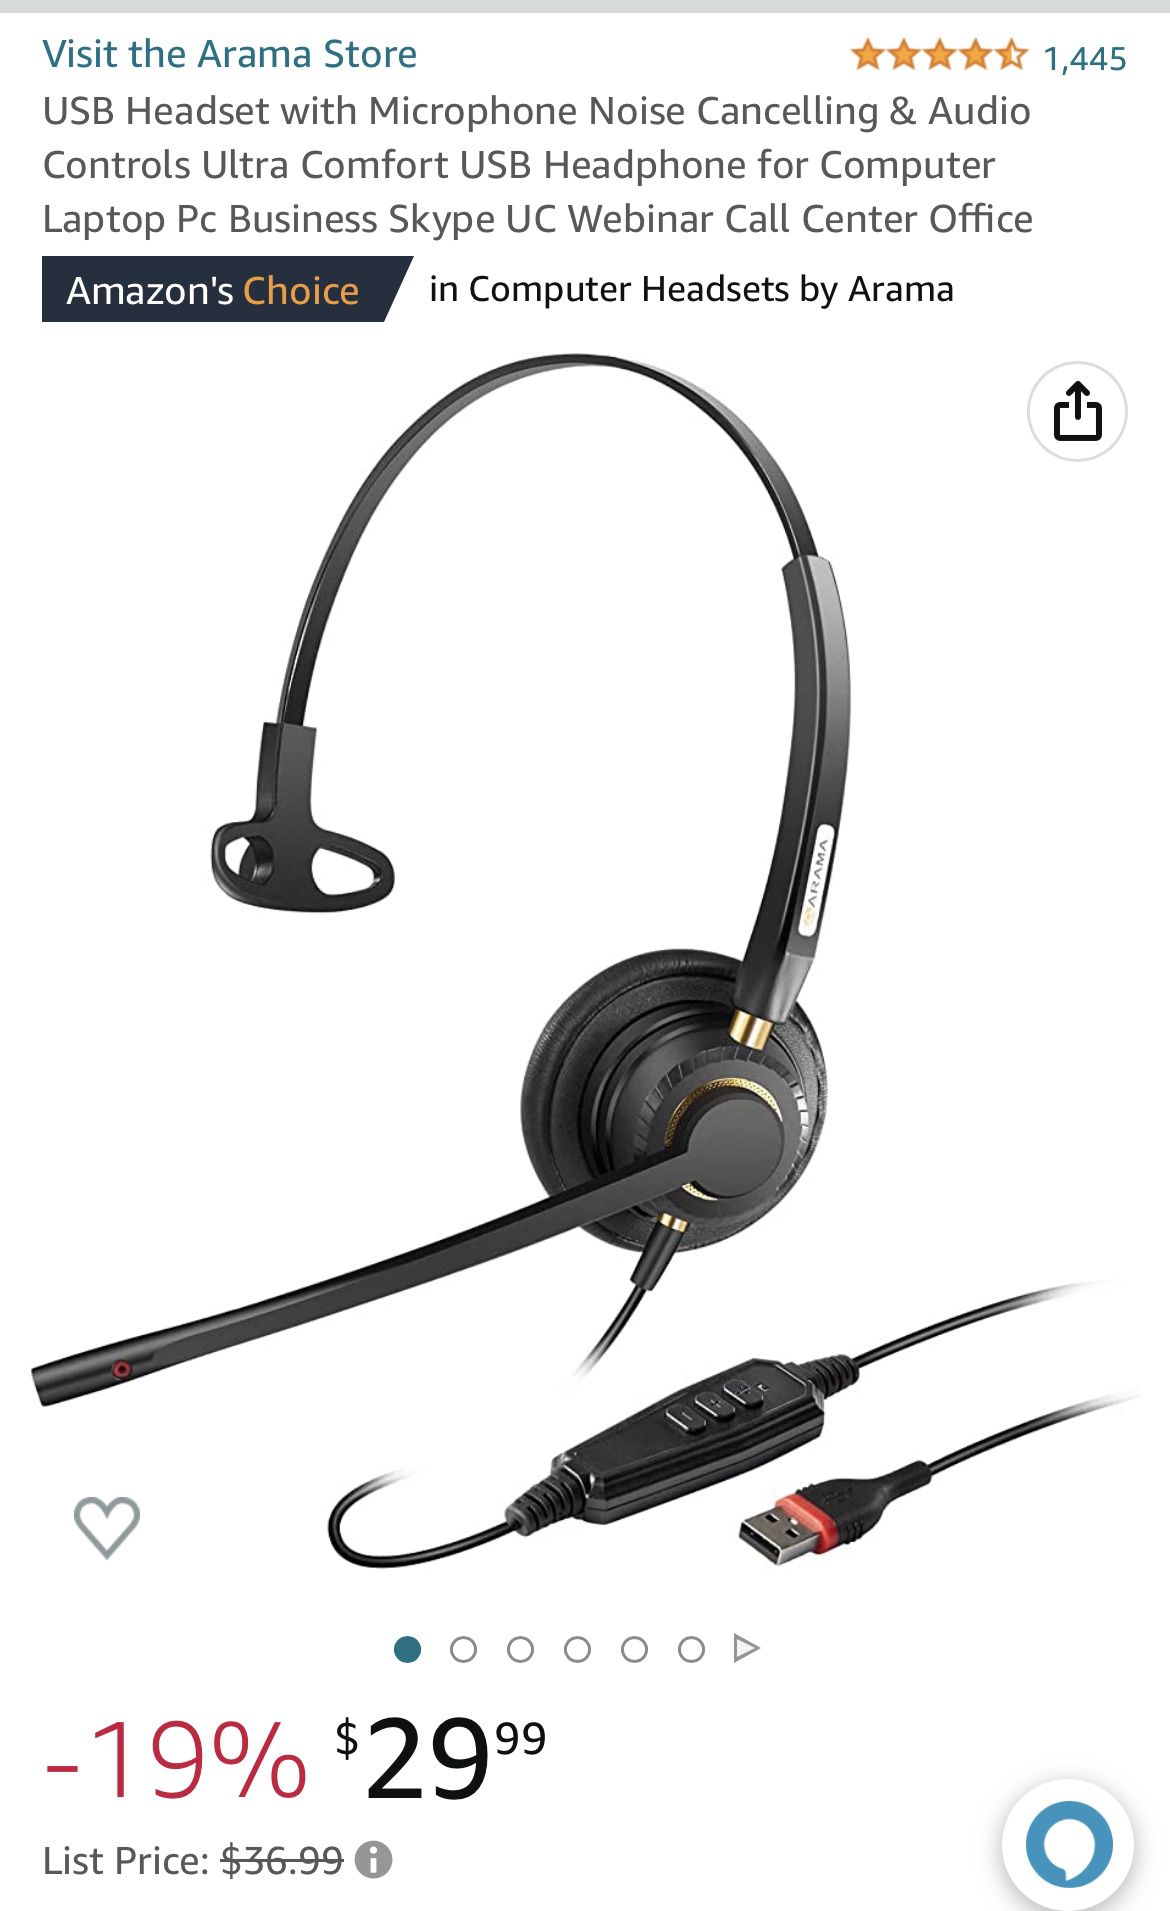 USB Headset With Mic